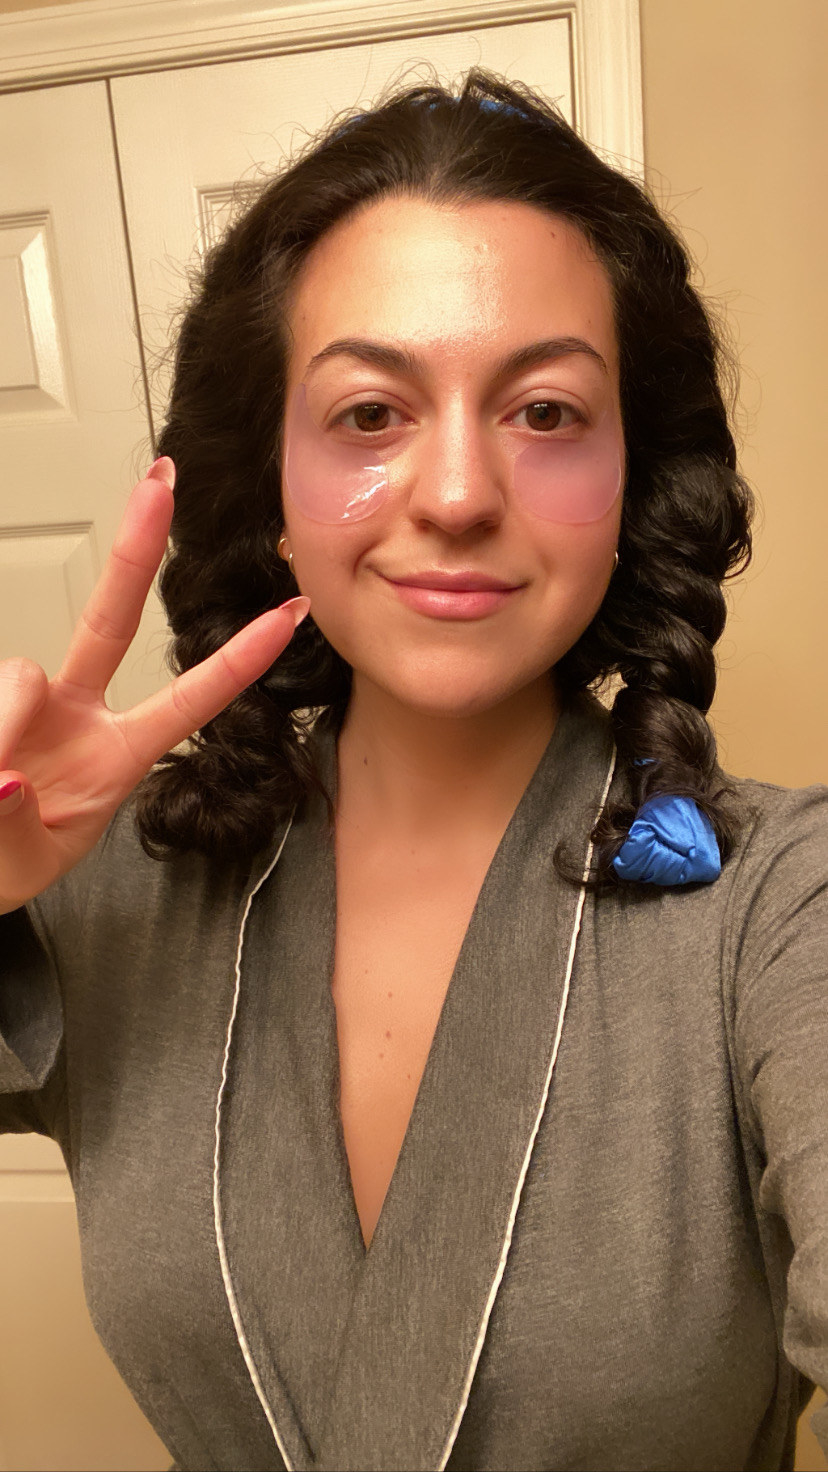 The author wearing a grey robe, hair wrapped in a ribbon, and under eye patches doing a peace sign